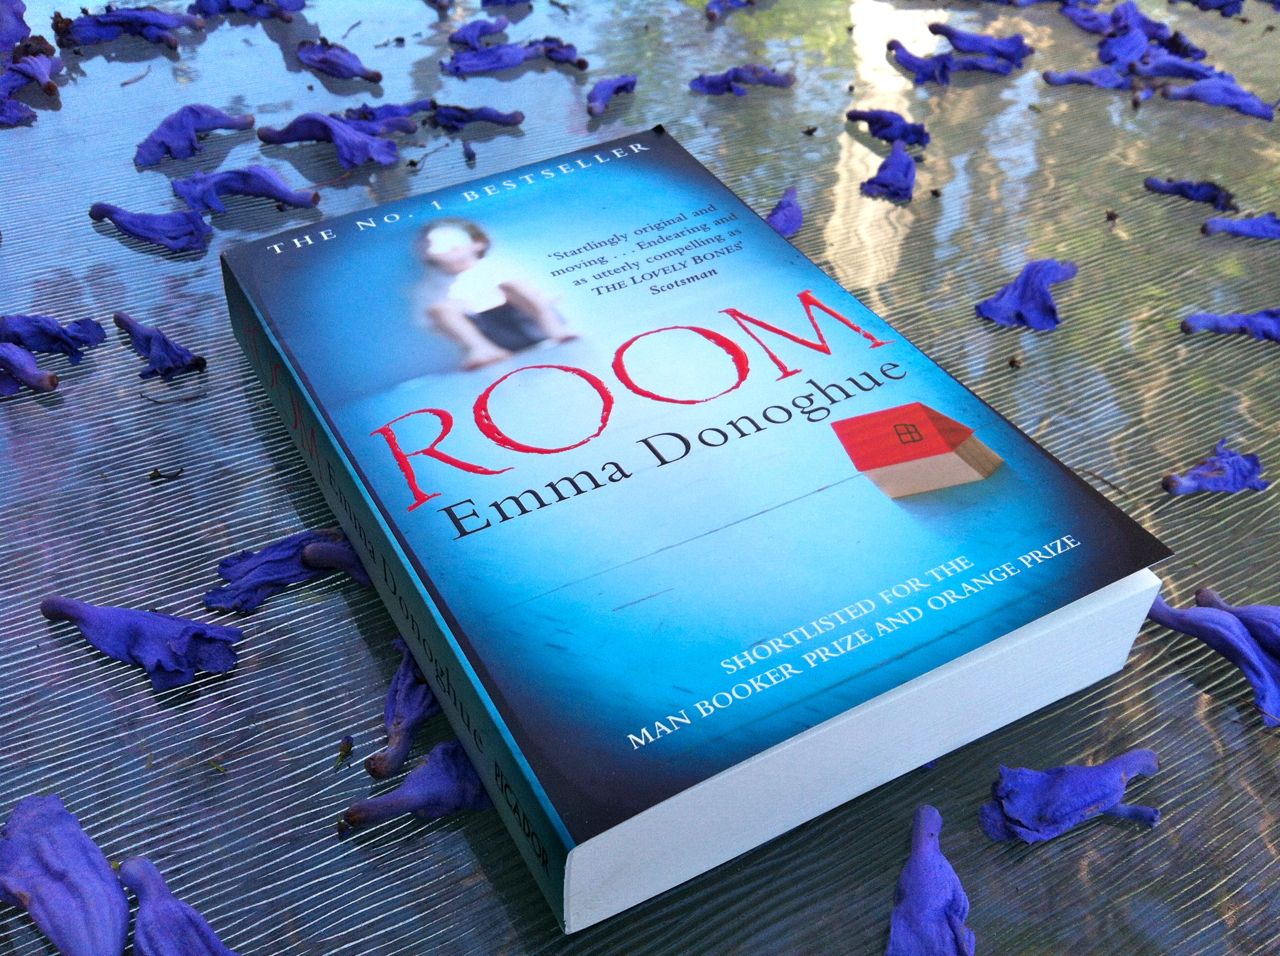 analysis of room by emma donoghue